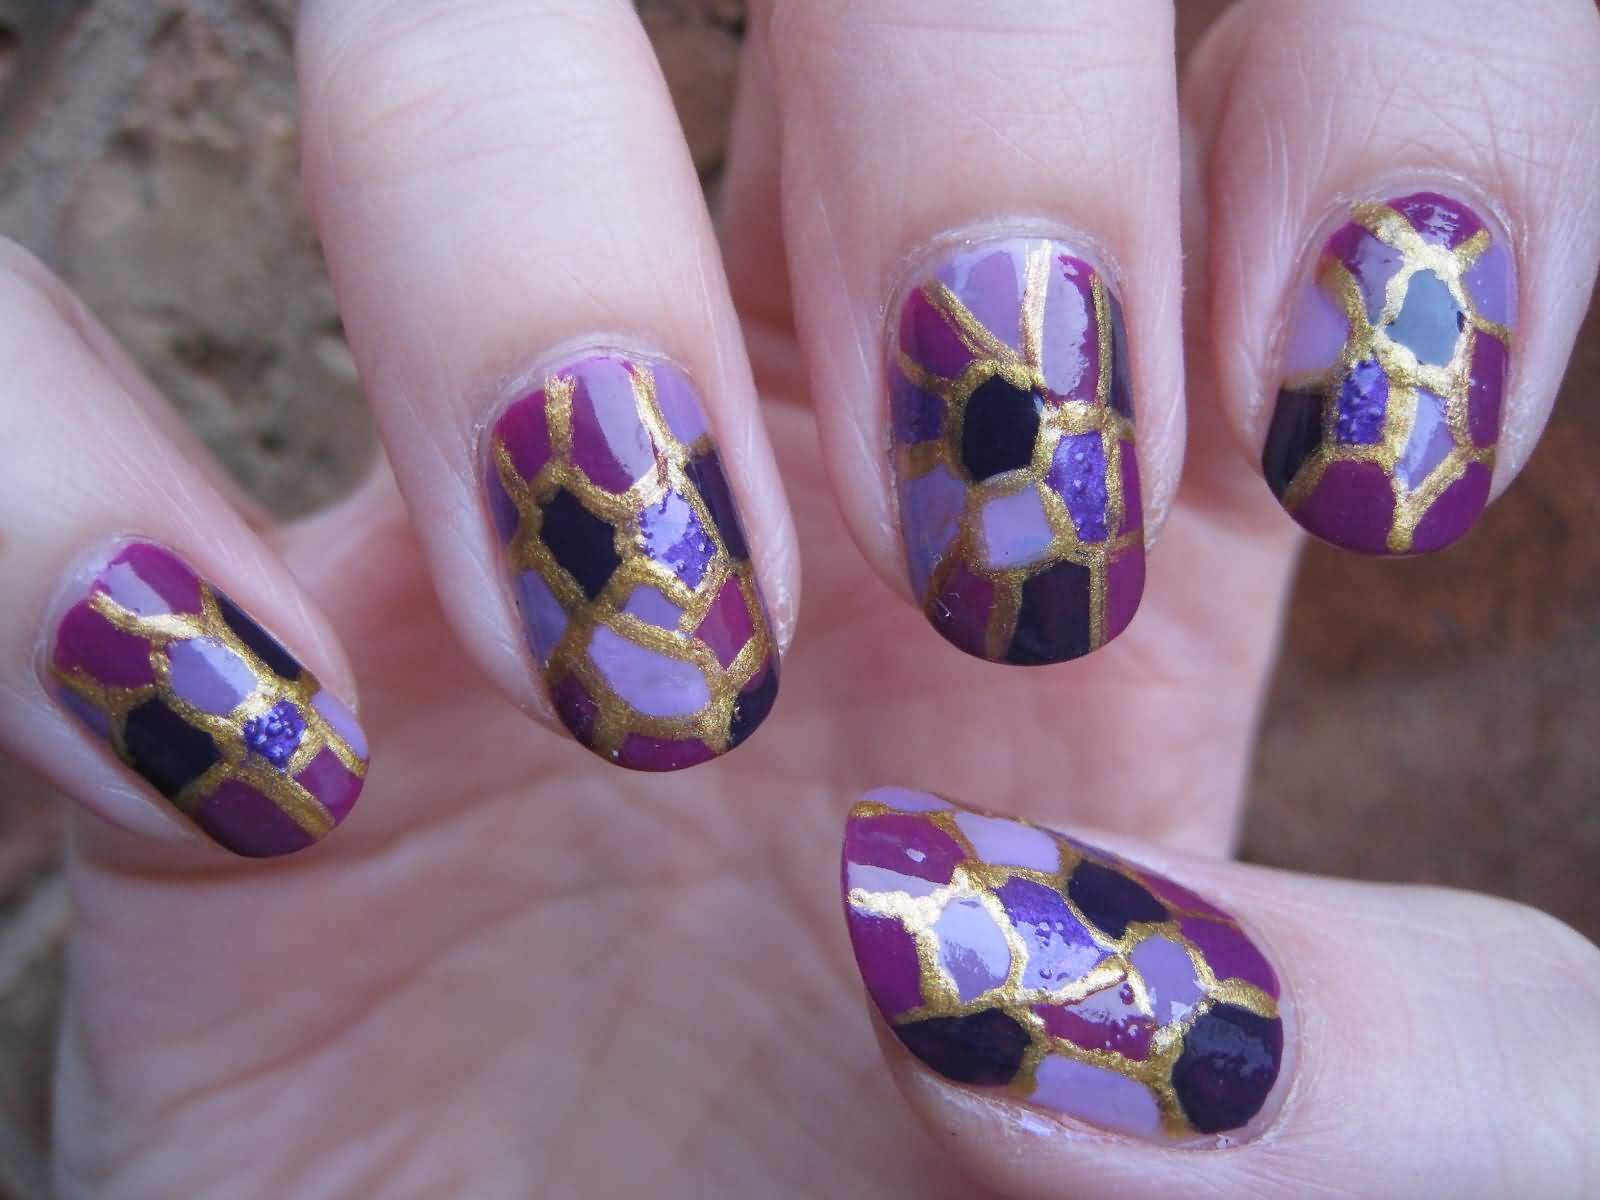 7. Beautiful Nail Art Ideas for Your Next Indulgence Session - wide 7